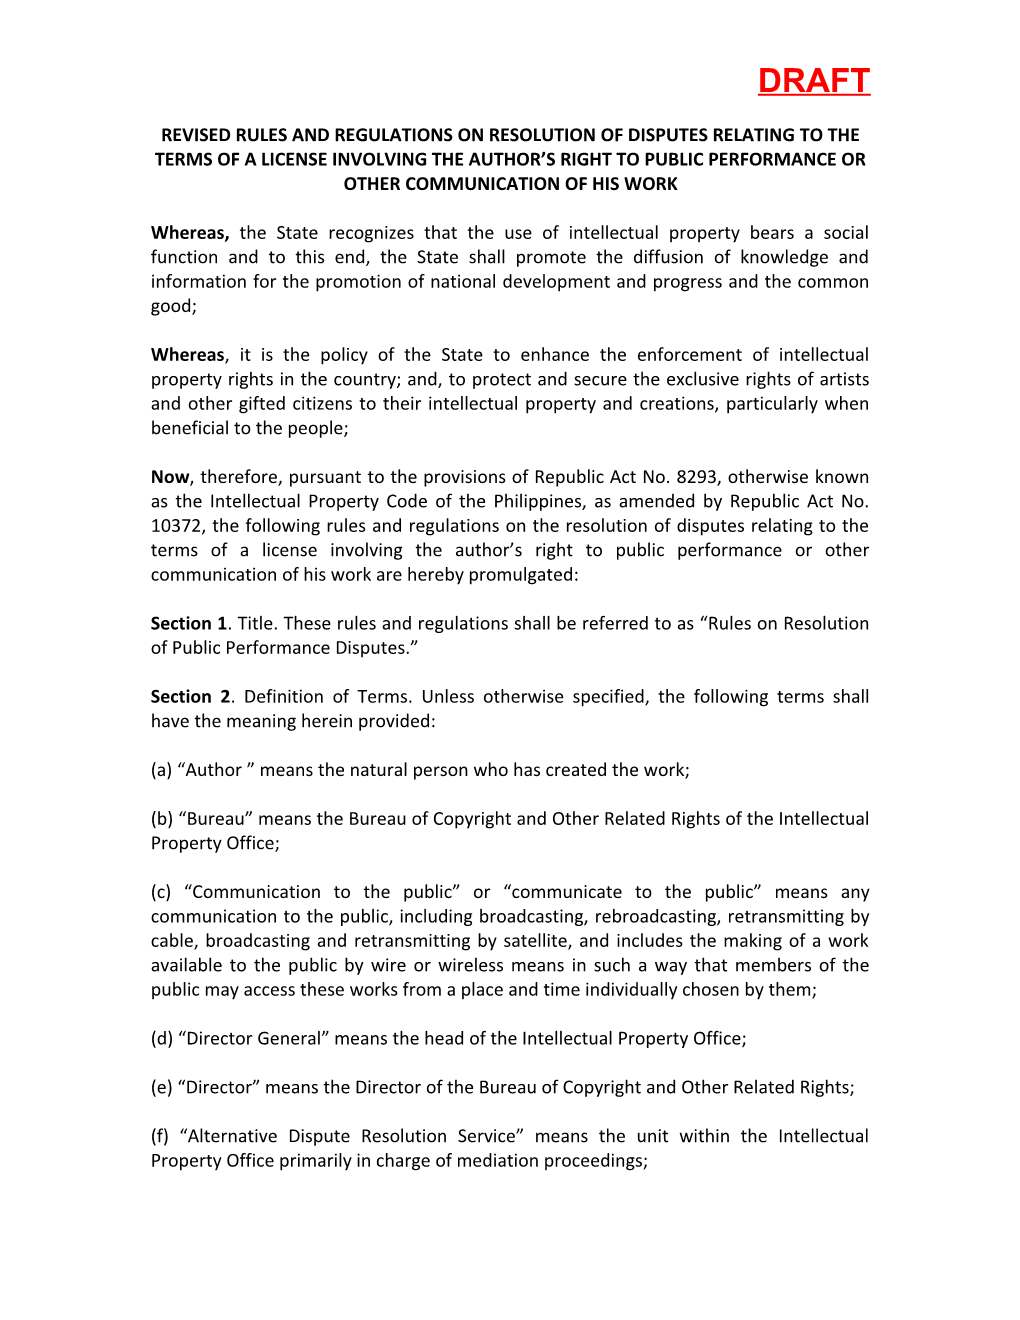 Revised Rules and Regulations on Settlement of Disputes Involving the Terms of a License